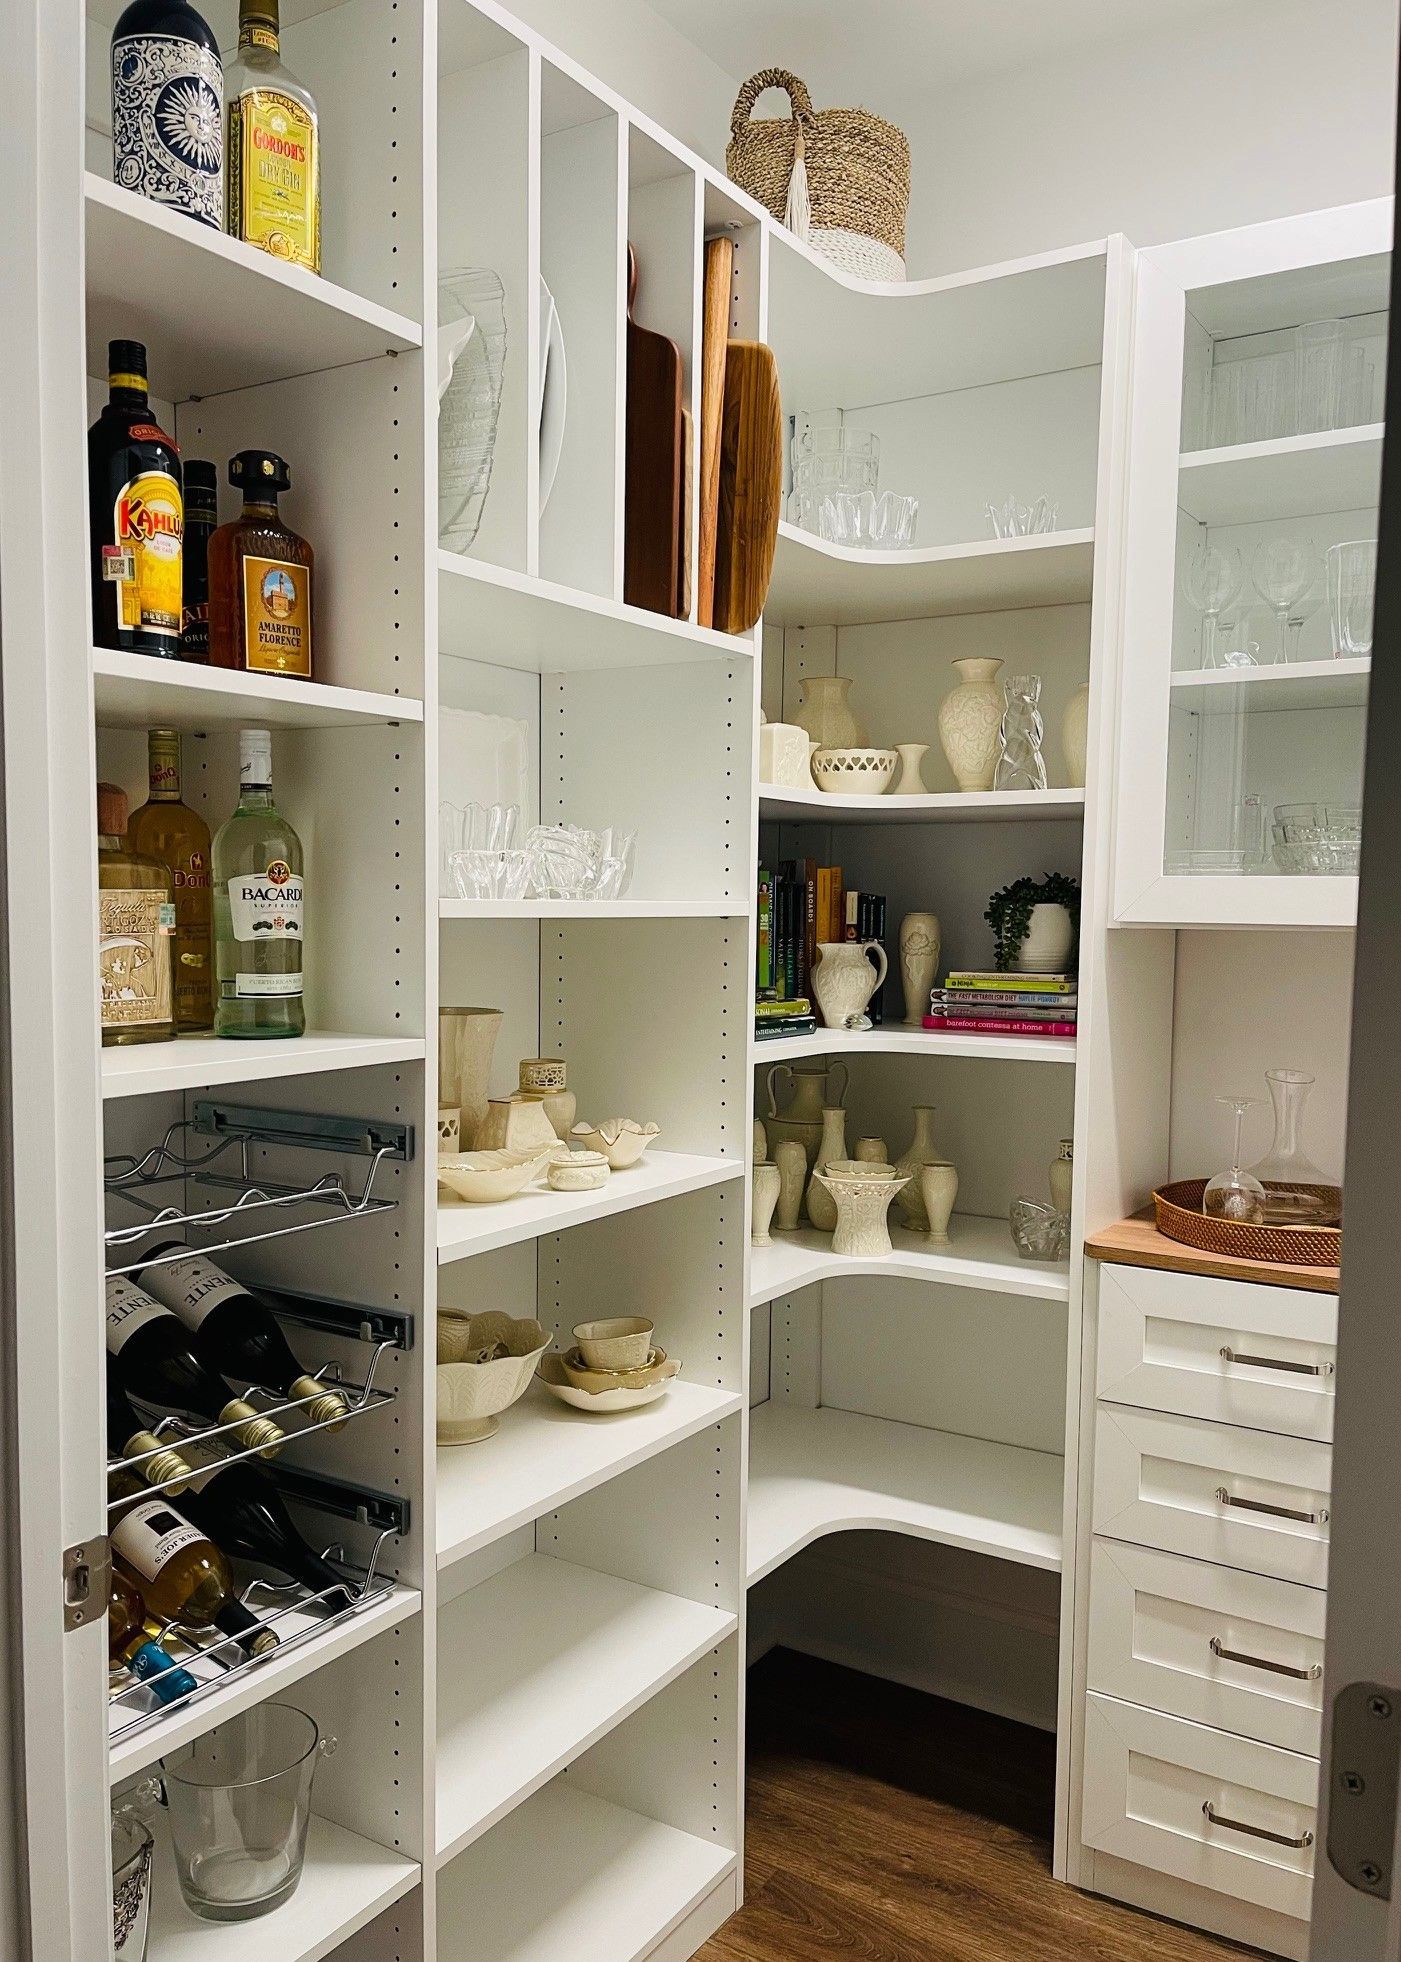 A pantry with lots of shelves and bottles on them.